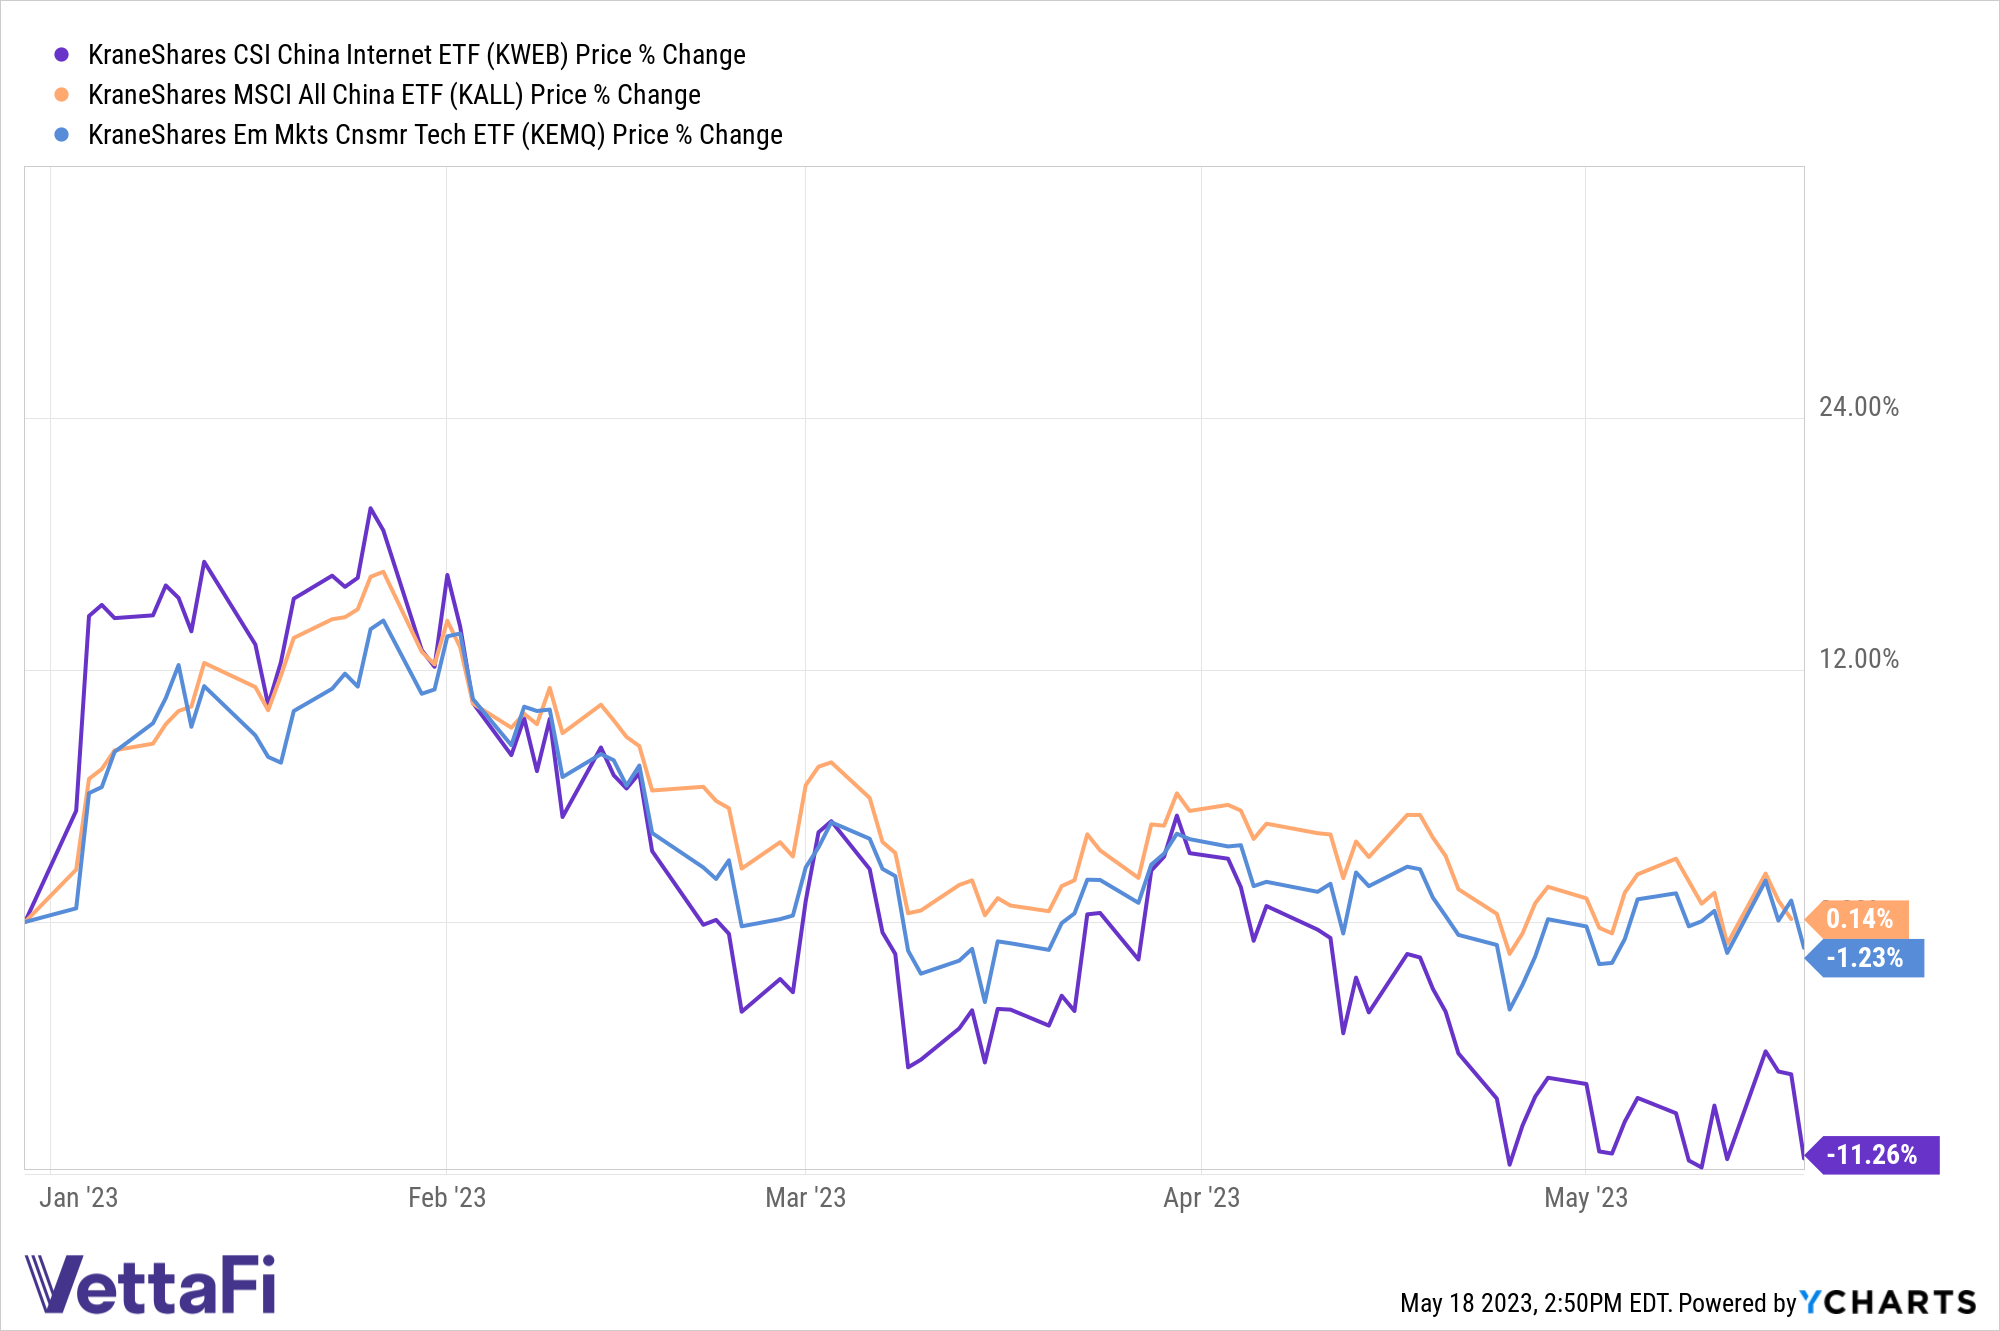 Chart of year-to-date performance for KWEB -11.26%, KEMQ -1.23%, and KALL 0.14% for advisors and investors looking to buy into opportunity in China.